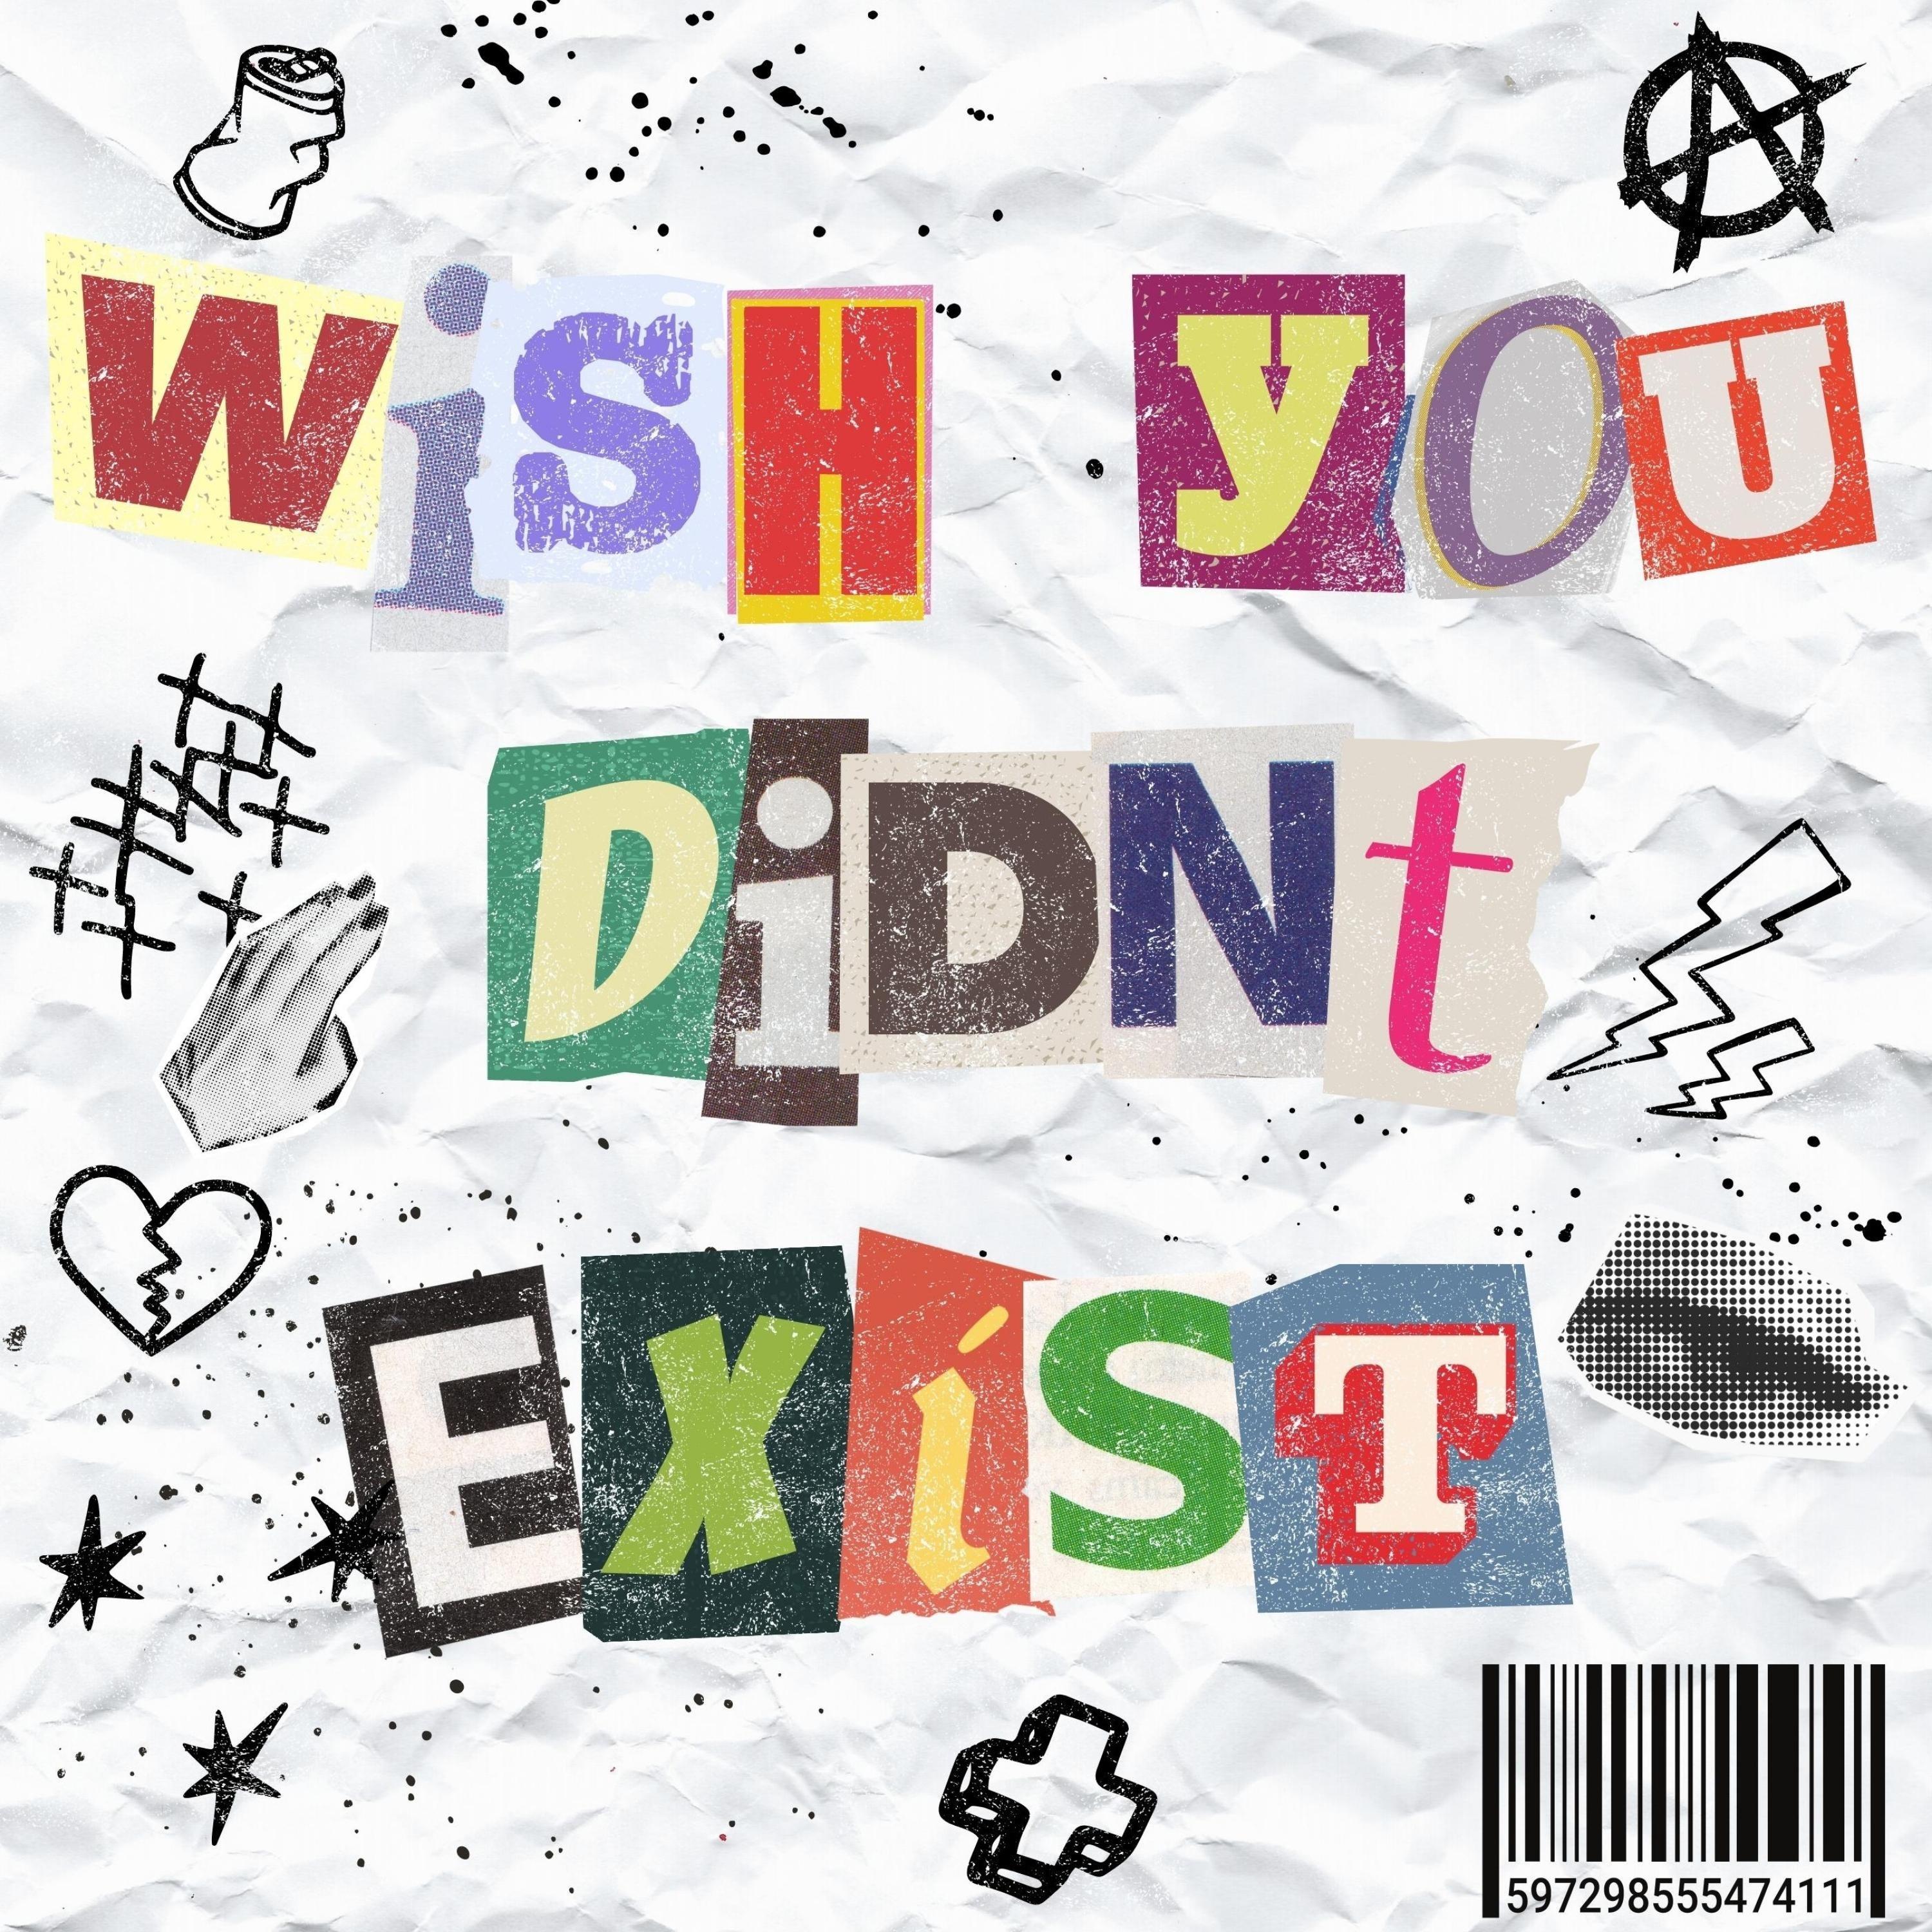 The 27s - Wish You Didn't Exist